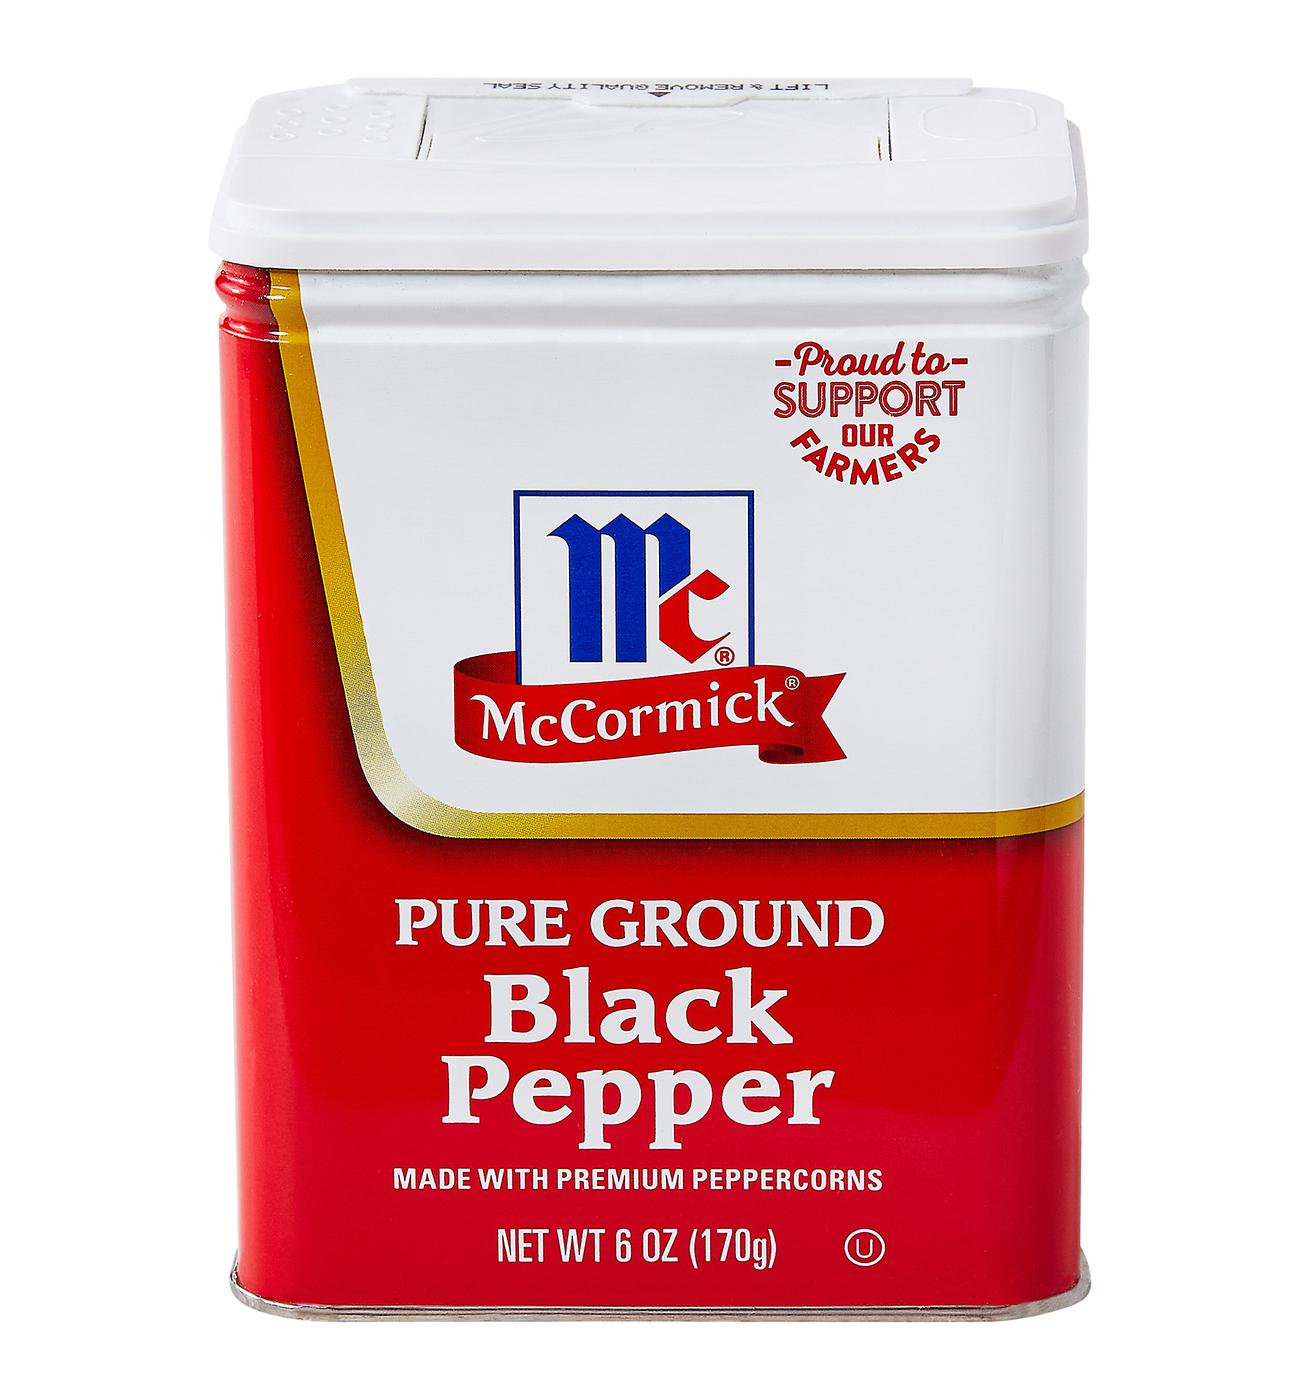 McCormick Pure Ground Black Pepper; image 1 of 7